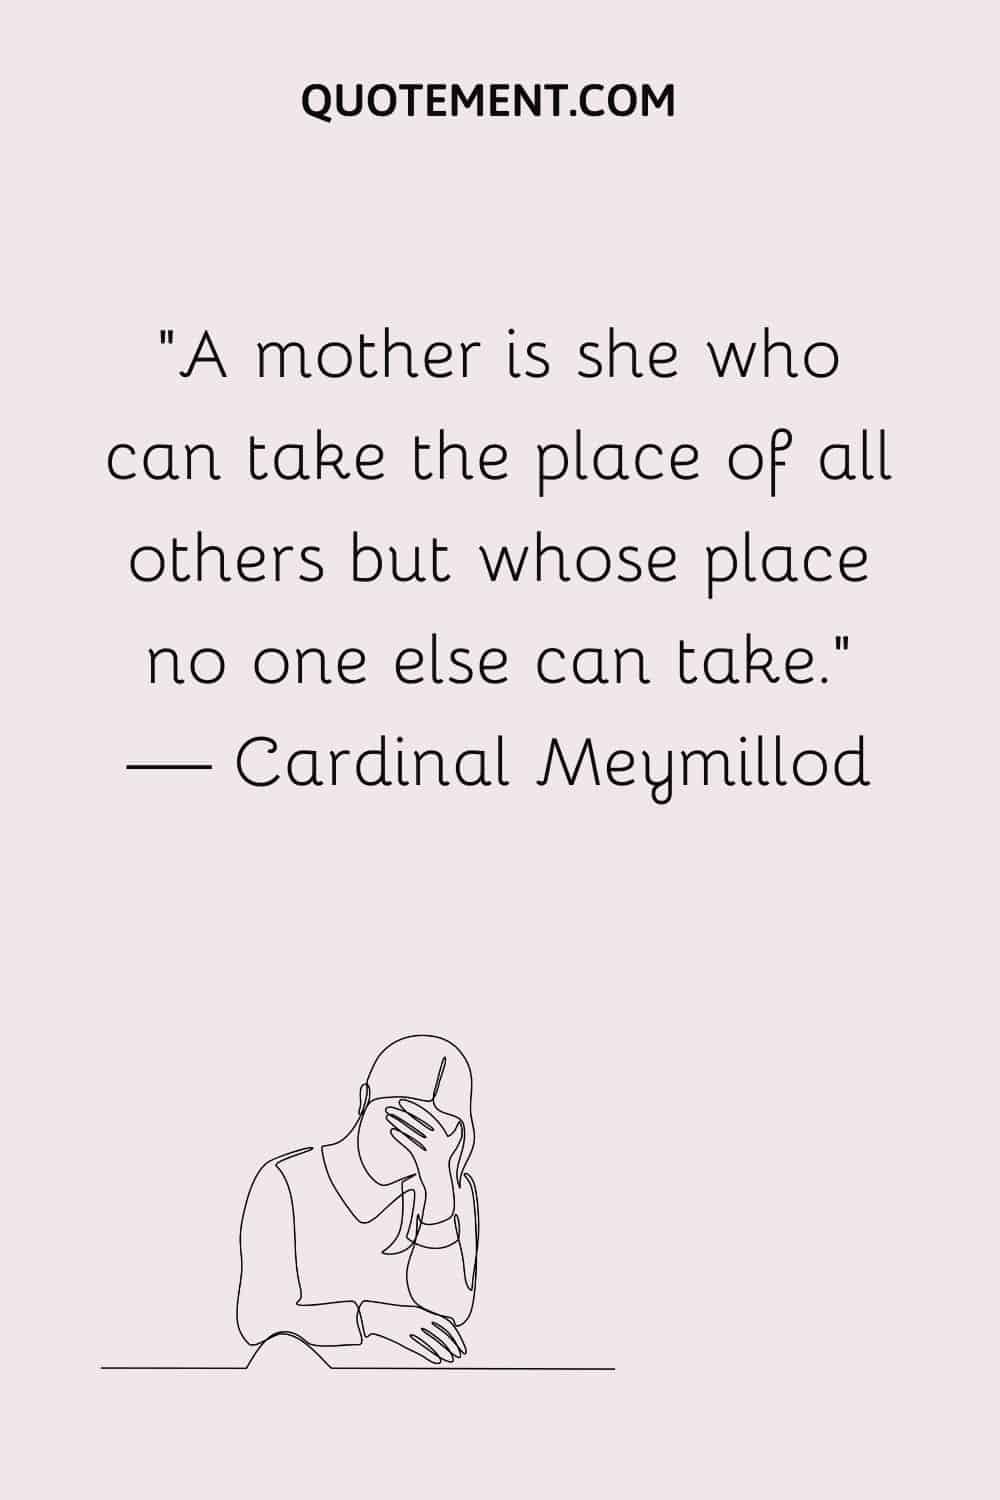 A mother is she who can take the place of all others but whose place no one else can take